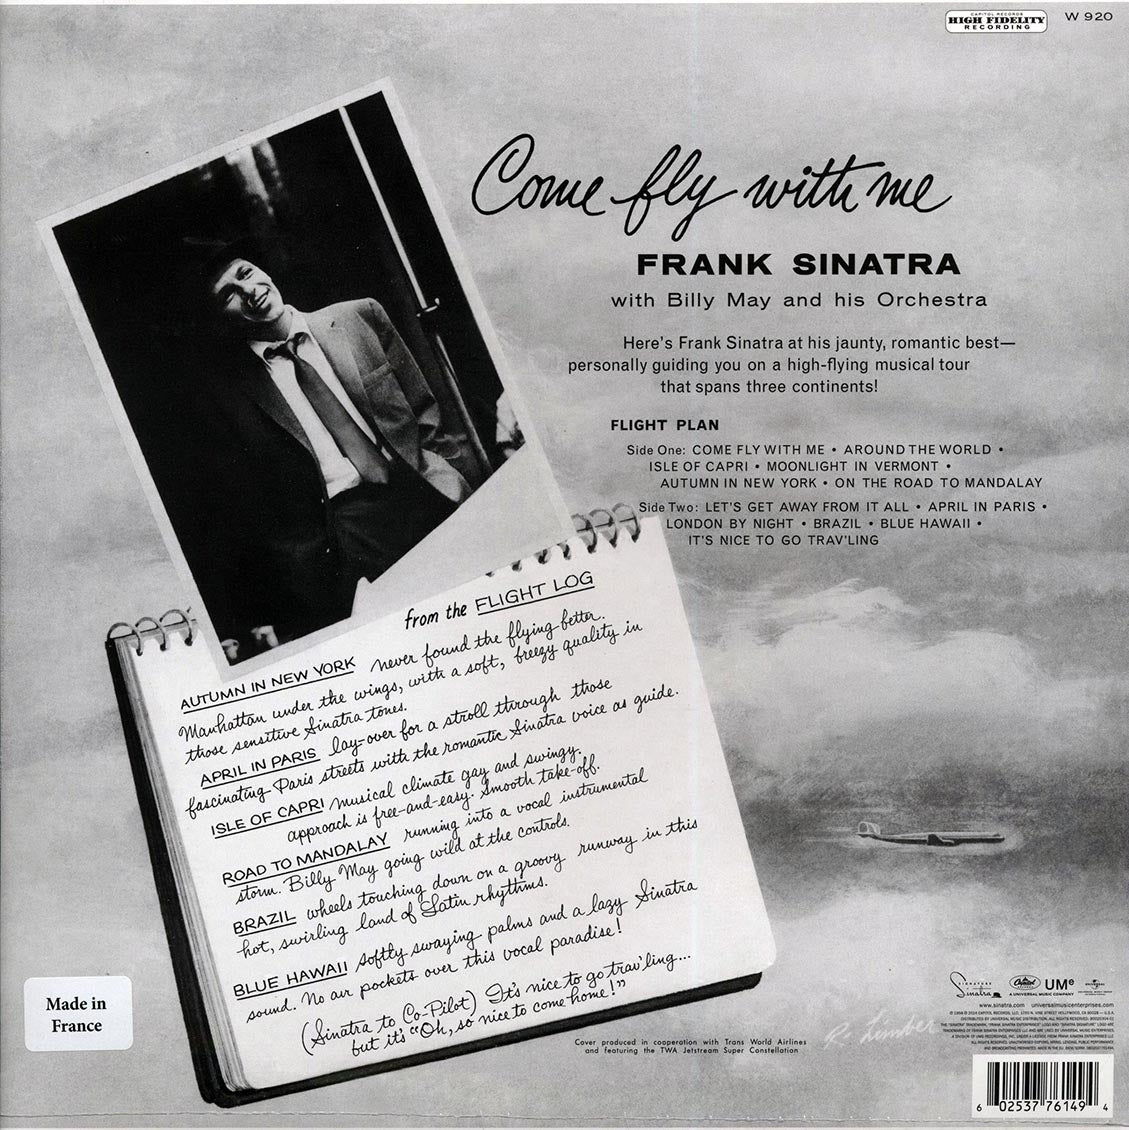 Frank Sinatra - Come Fly With Me (mono) (180g) (remastered) - Vinyl LP, LP